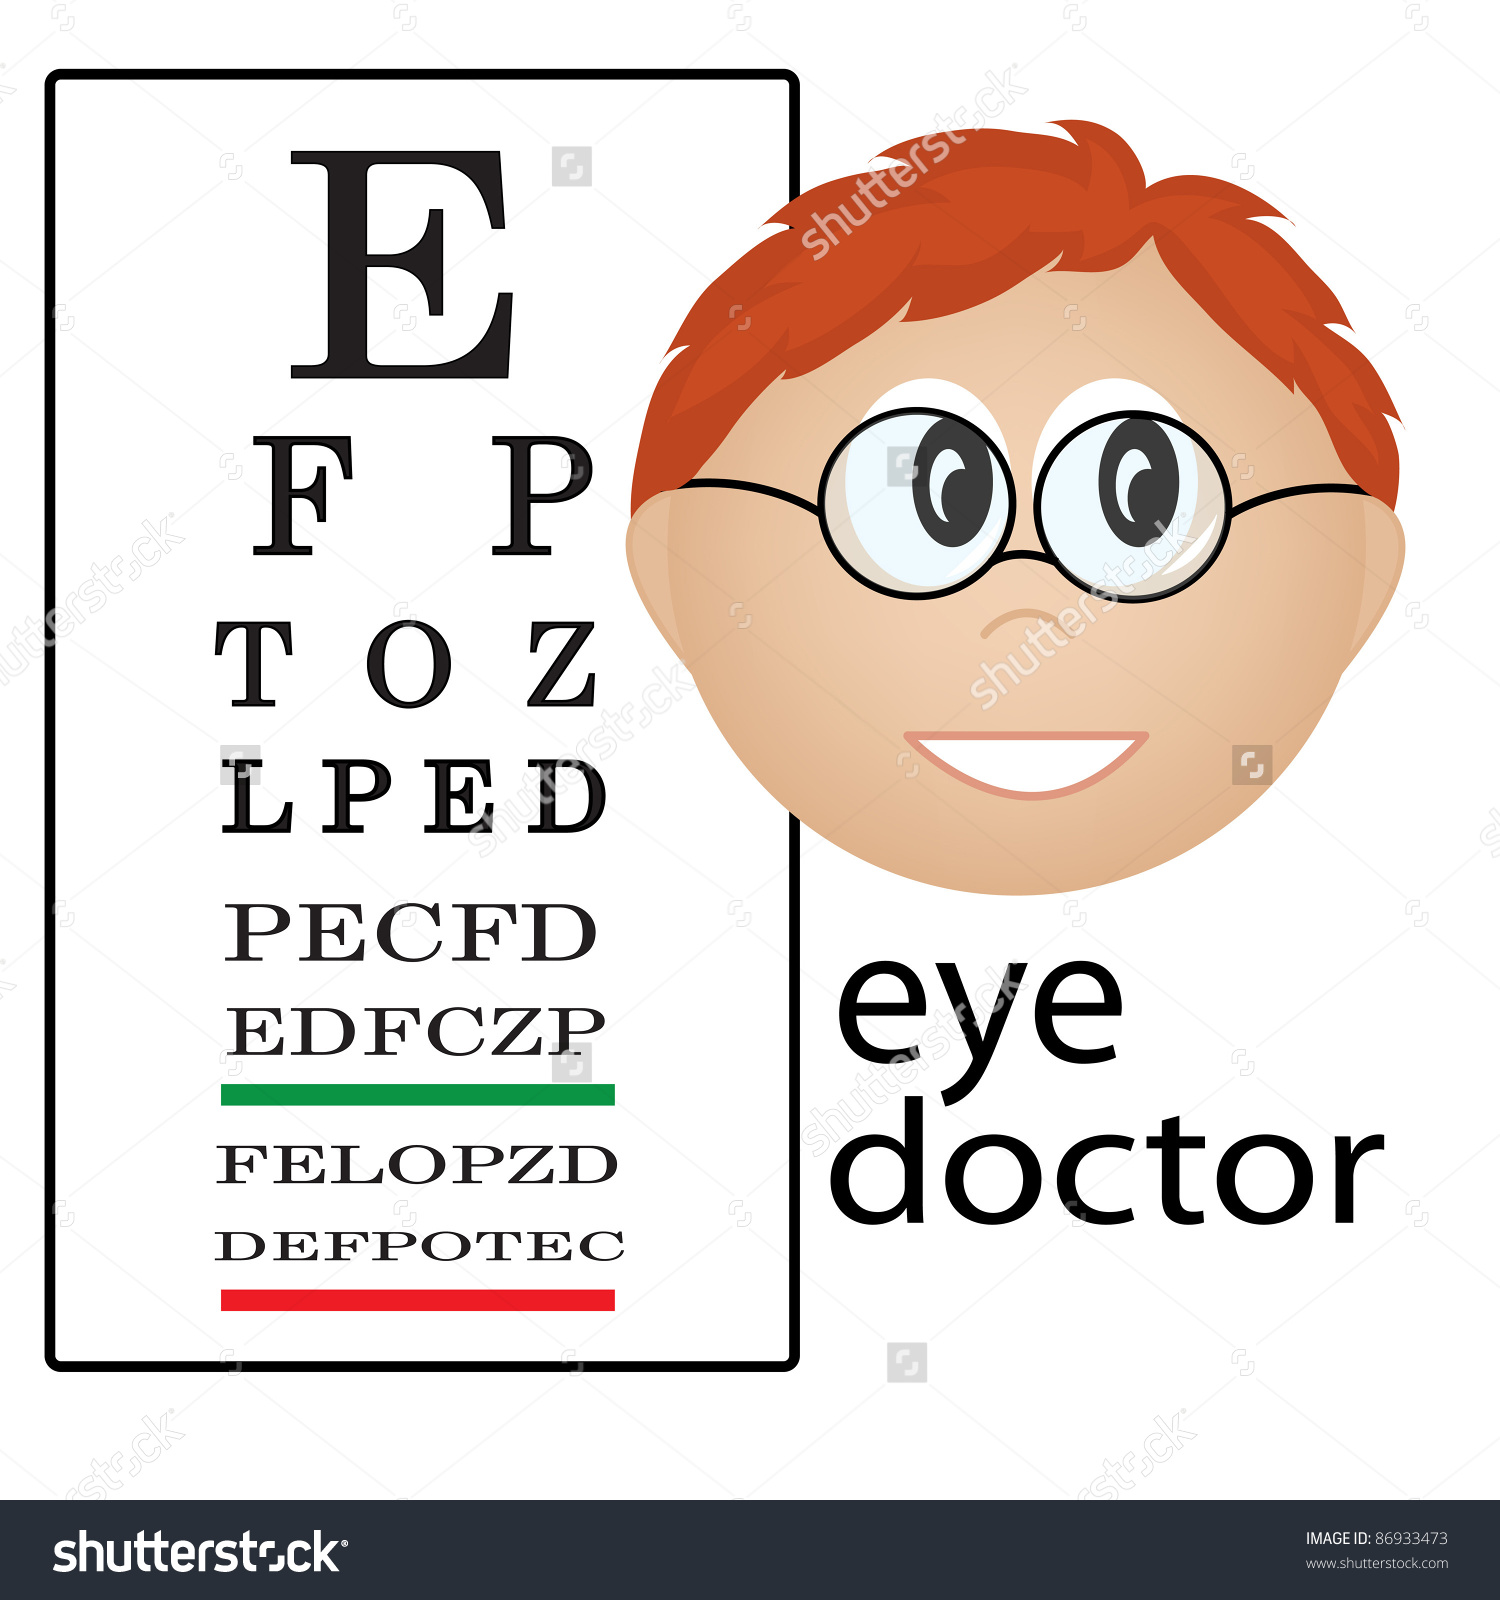 Clip art illustration of an eye doctor occupation icon.